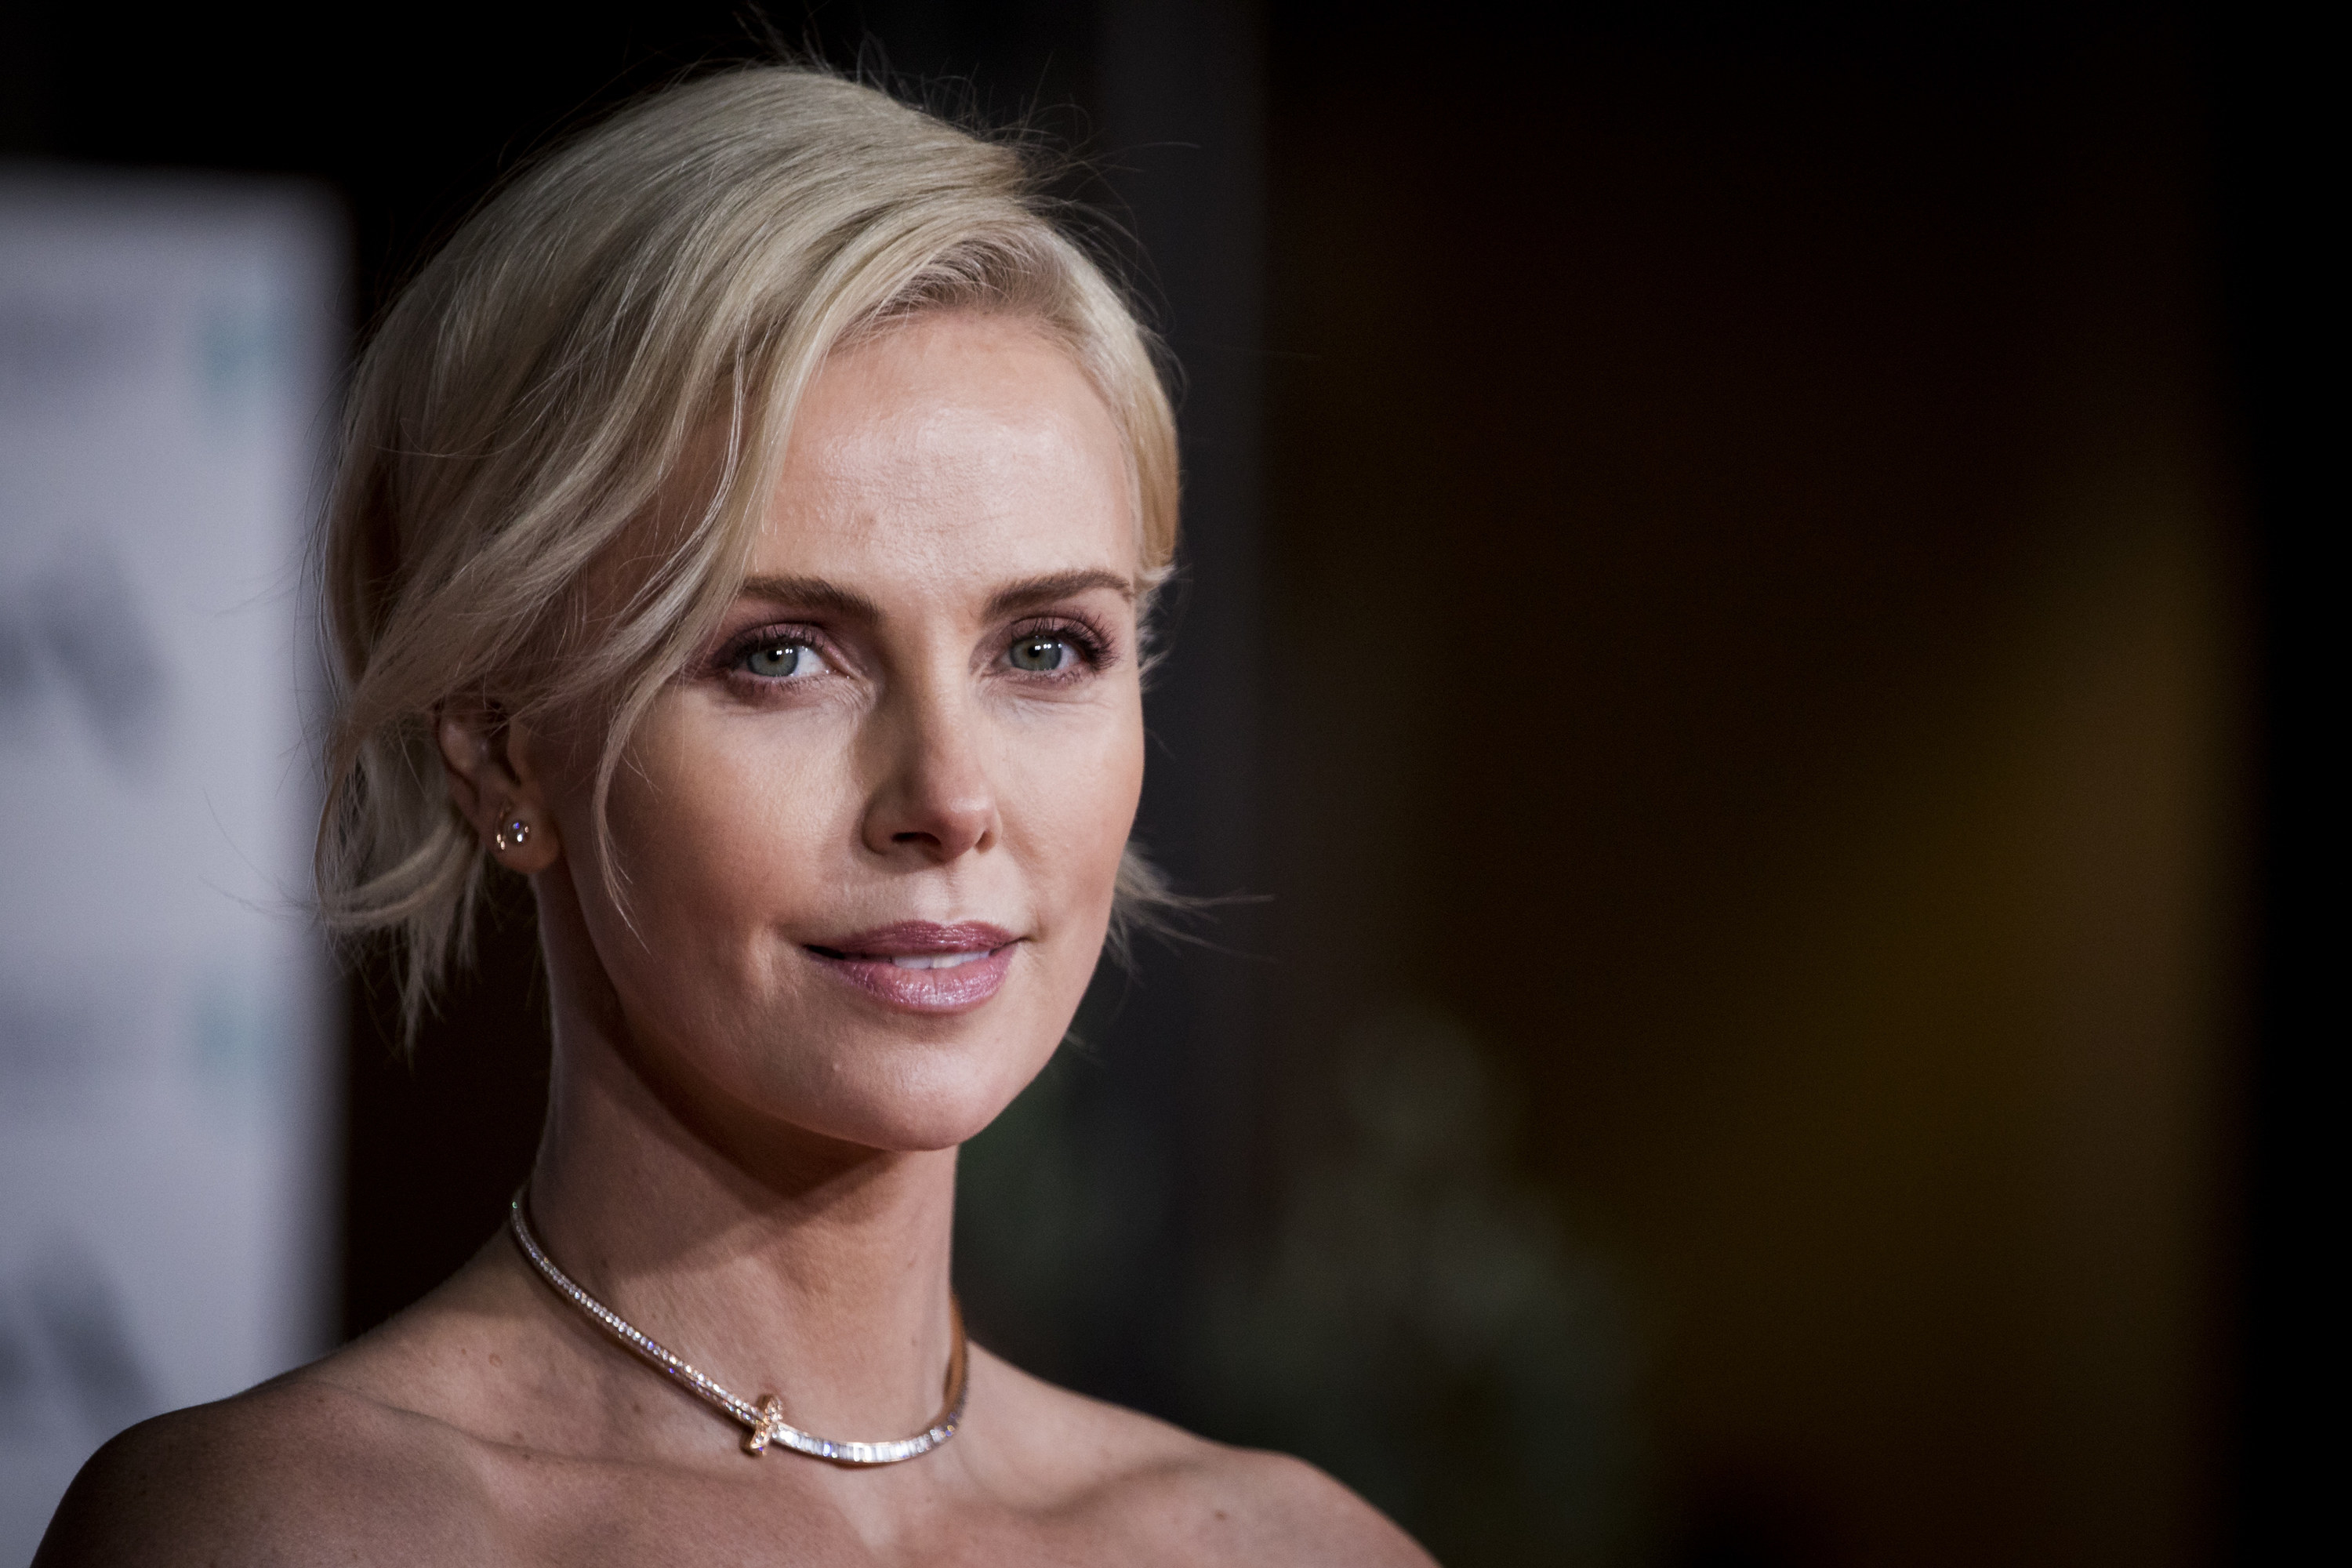 Charlize Theron at an event, smiling